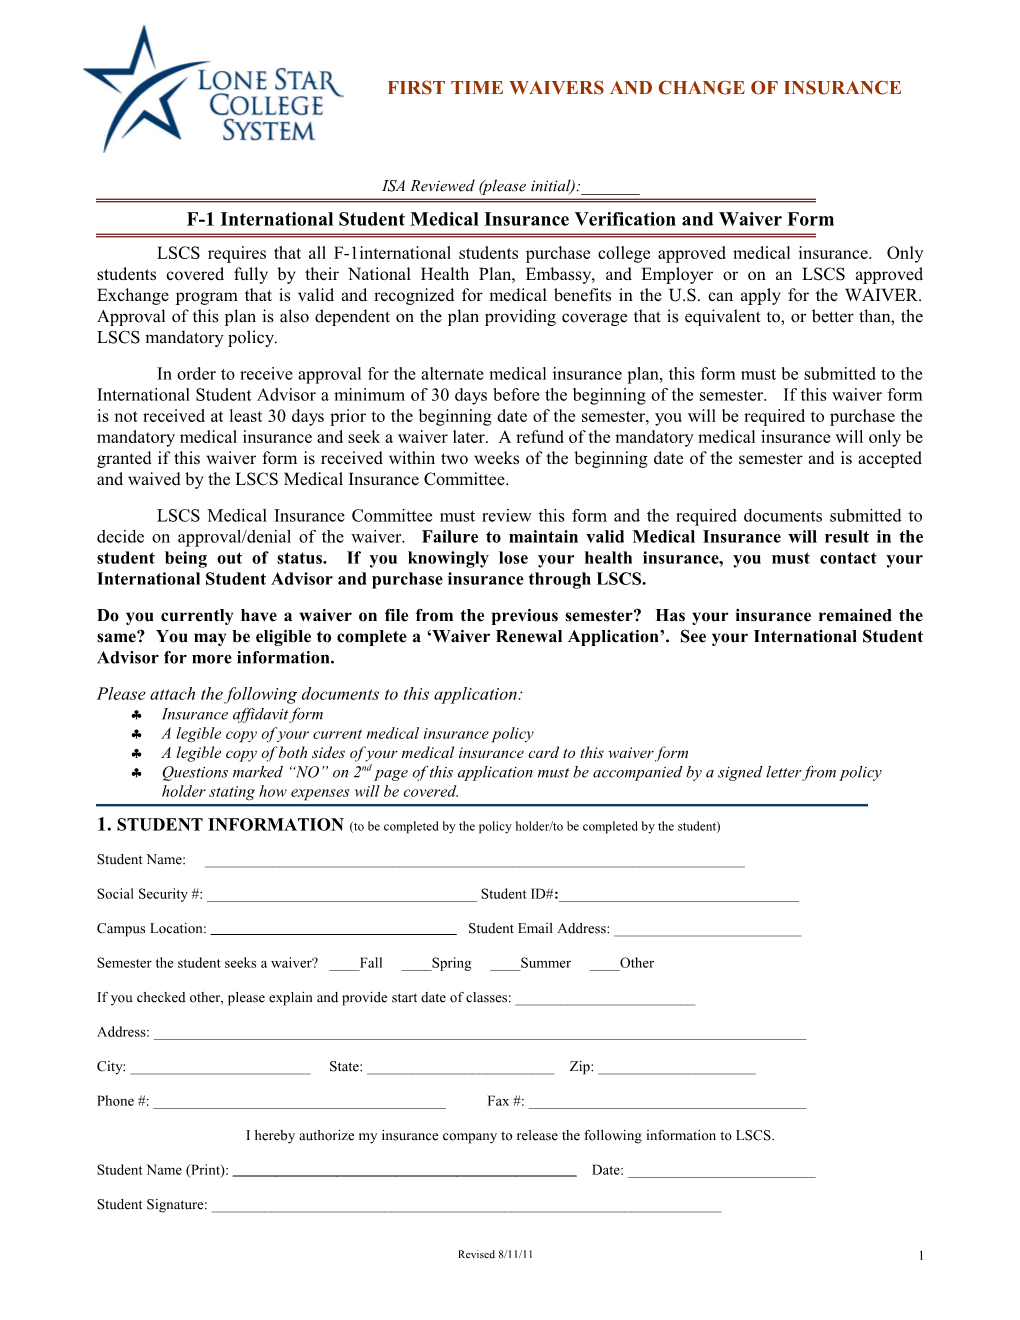 International Student Health Insurance Verification and Waiver Form